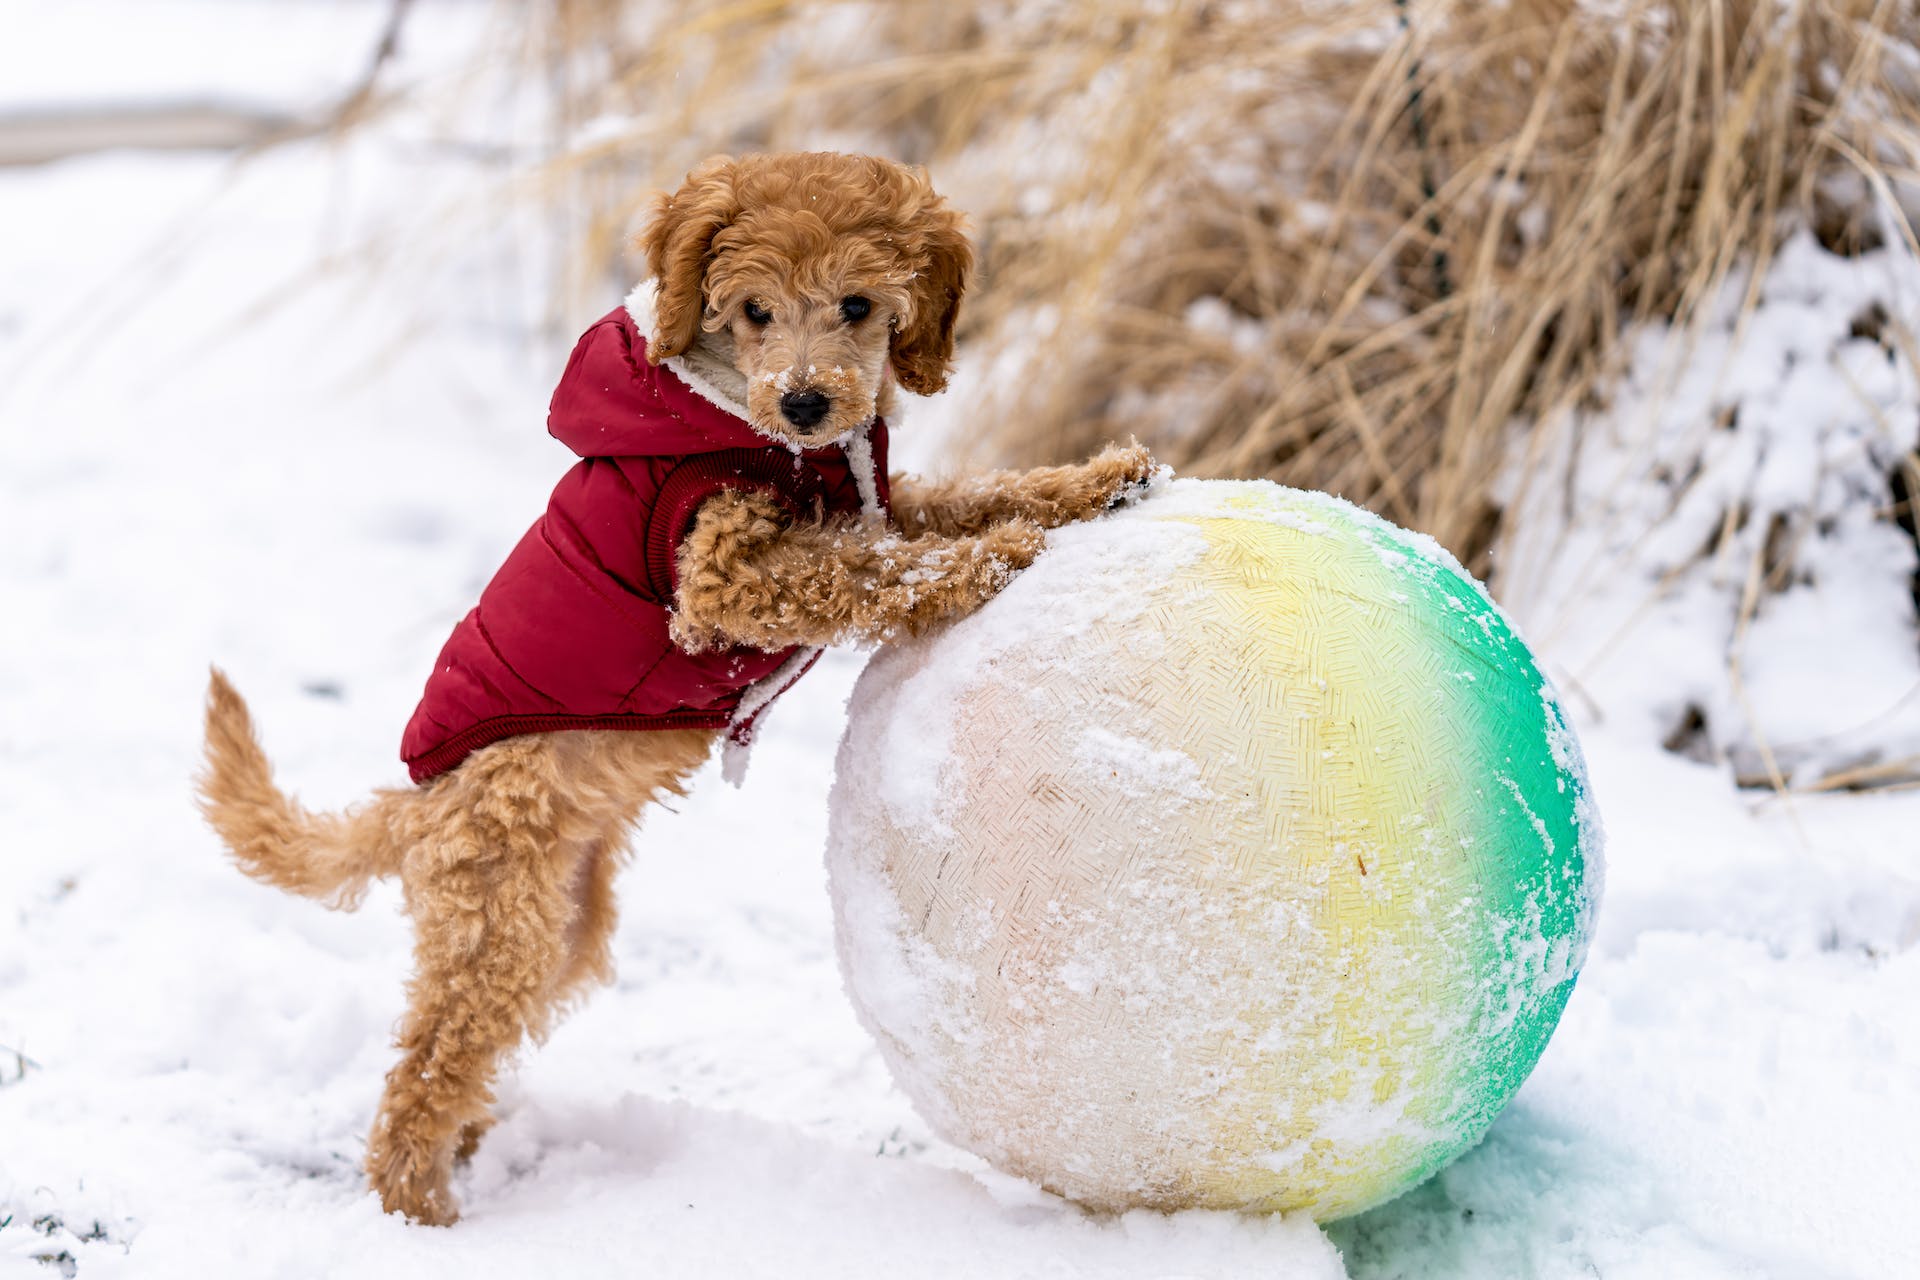 A puppy playing with a ball in the snow